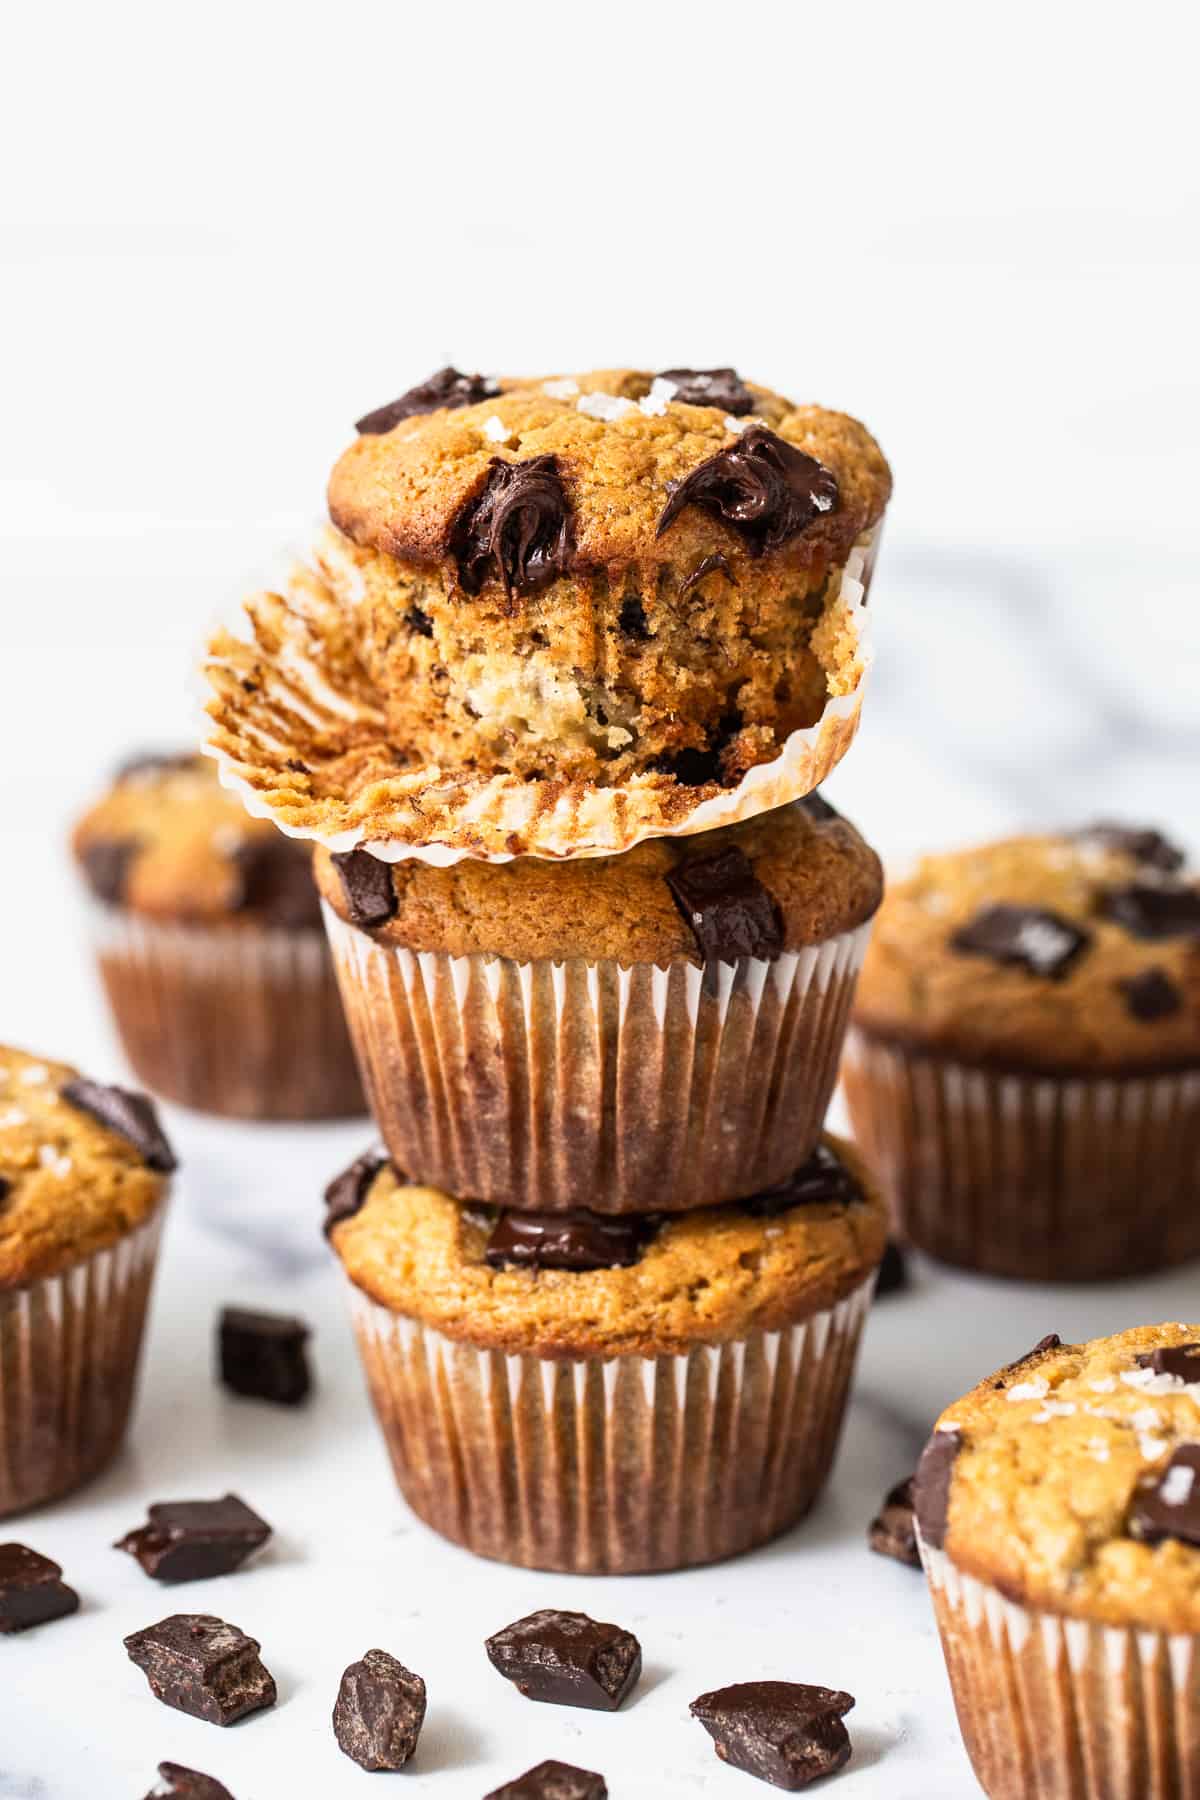 Fit & Flavorful Fat Free Muffins